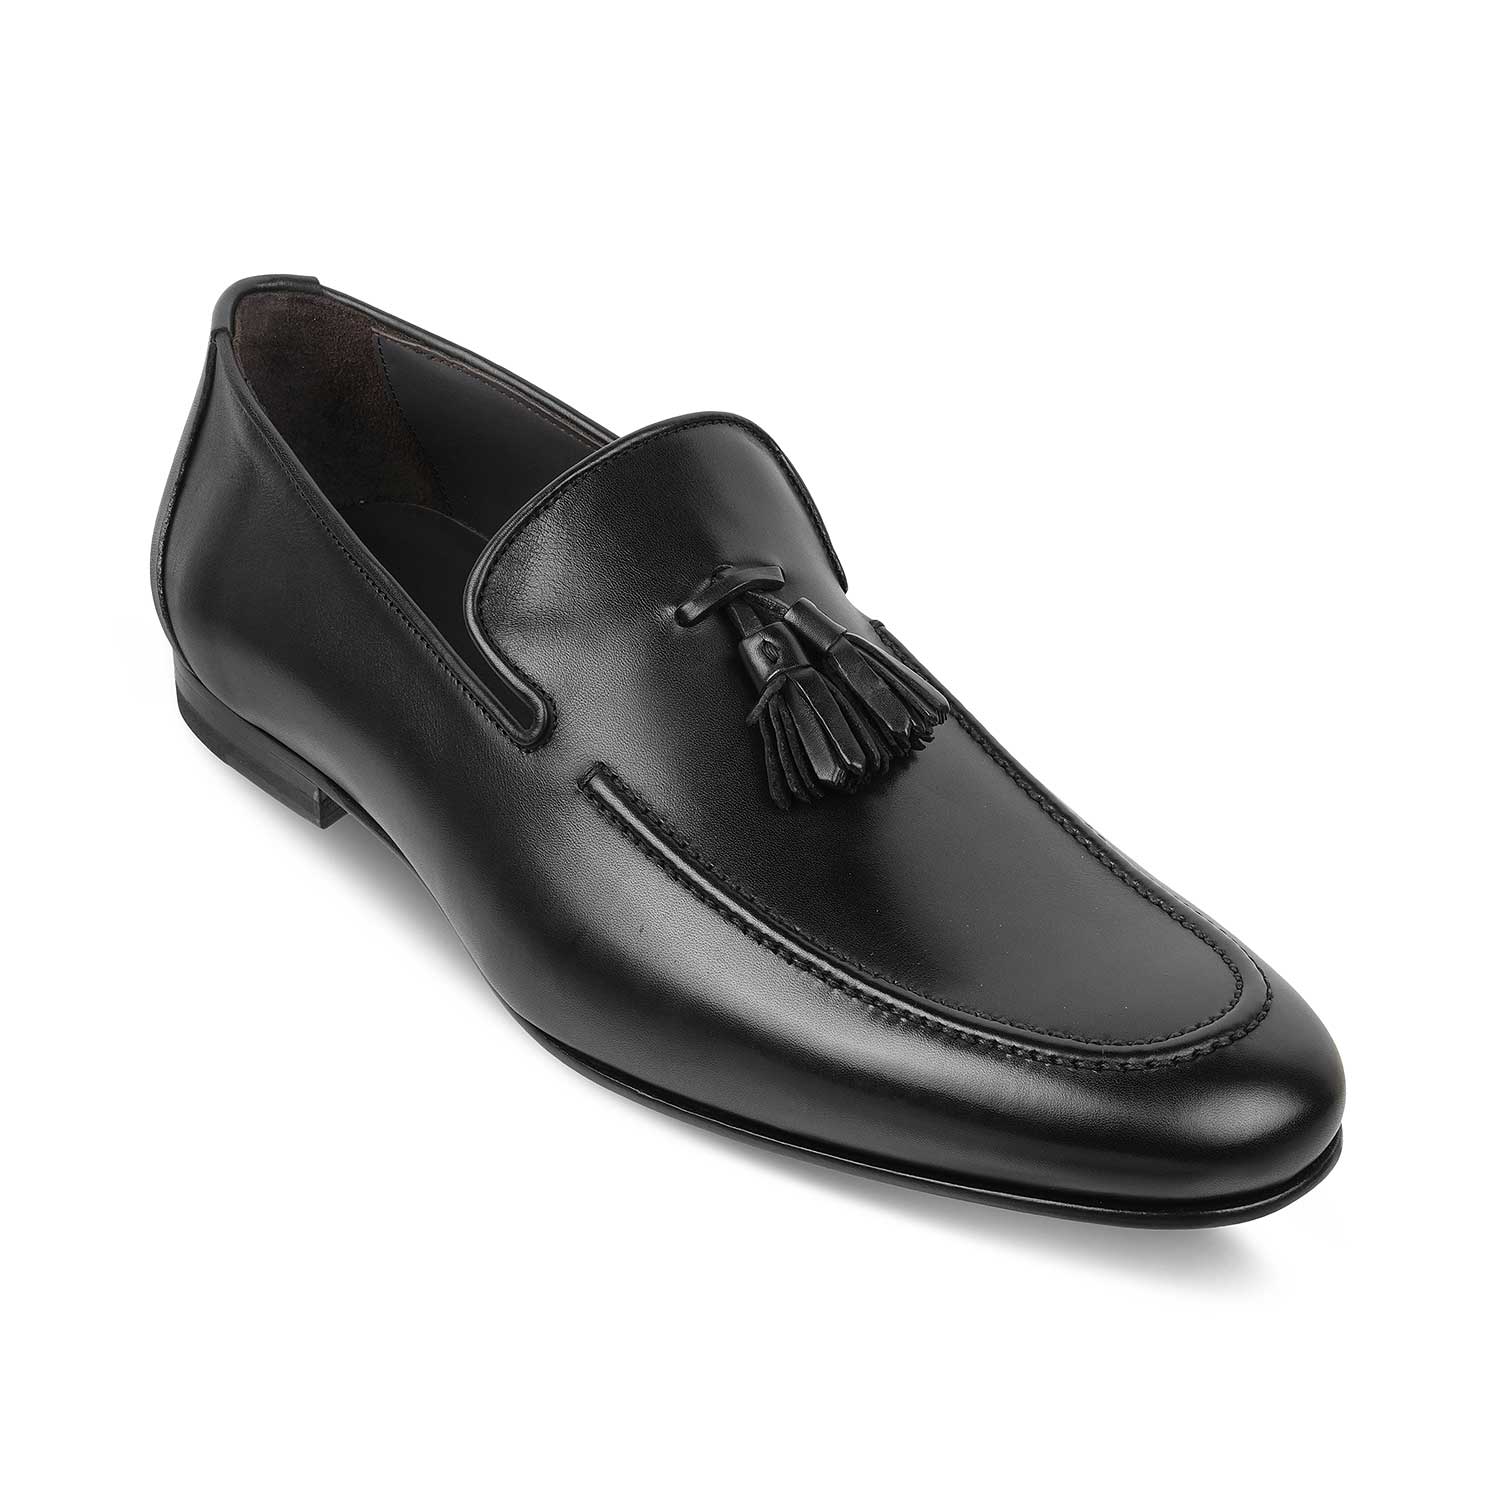 The Mancio Black Men's Handcrafted Leather Loafers Tresmode - Tresmode